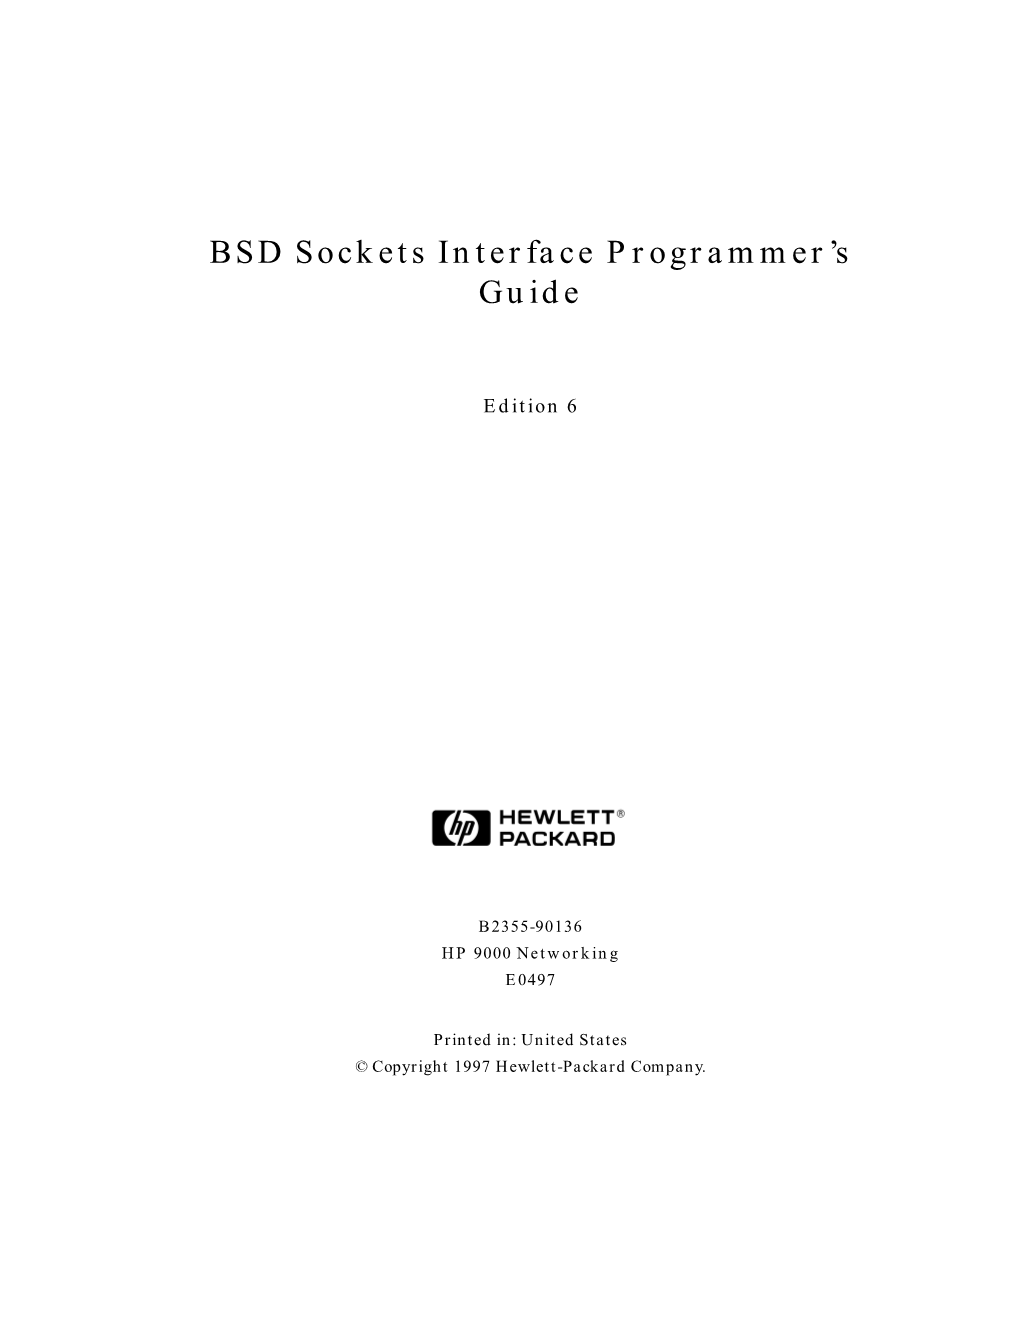 BSD Sockets Interface Programmer's Guide Is the Primary Reference for Programmers Who Write Or Maintain BSD Sockets Applications on HP 9000 Computers